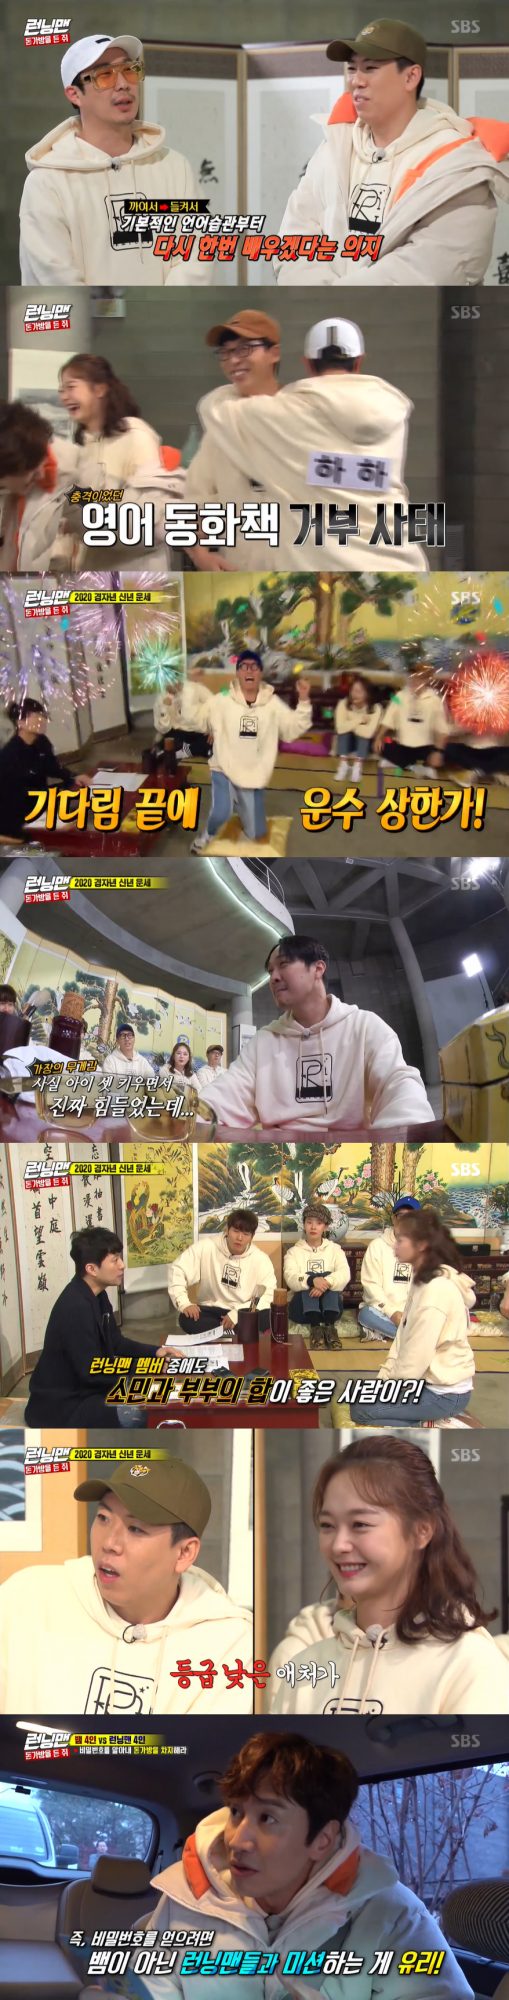 Haha, who won the Money bag at SBS Running Man, shared the prize money with the members and the production team, creating a warm atmosphere.On the 26th, Running Man, Money bag rat race was held.Prior to Race, the members talked about the New Years wishes on New Years Day and had time to see Park Sung-joon and Saju.Park Sung-joon, a mechanic, told Ji Suk-jin, It is a year to hold money and honor. It is good to work as soon as physical strength allows.There may be more overseas activities or local activities, he said.This year and next year are lucky years, and if you miss this time, you will be lucky at 64 and 65, he said. You have a strong desire for money and a little desire for honor, but if you do not get embarrassed, you will go to money.Next, Haha saw the owner. Park Sung-joon, a commentator, said, Mr. Hahas era is held for five years from 2020.It is a luck running toward the peak, he said, making Haha thrilled.Mr. Haha should give luck to Mr. Yoo Jae-Suk, he said. We need to help you because you are the Princess and the Matchmaker who takes away the energy of Yoo Jae-Suk.Jeon So-min had been asking questions before he sat down.Park Sung-joon, a translator, surprised Jeon So-min by saying, The young man can meet his natural life as he joins his husbands position.I think it will come after the start of the year, said Park Sung-joon, an introvert. My husband has a kite with someone who is old and old and has no kite, he said.So, when I saw Jeon So-min and love line Yang Se-chan, the members were sad.However, Park Sung-joon, a commentator, said, There is a good person here in The Princess and the Matchmaker.Park Sung-joon introvert laughed when he said Jeon So-min and Yang Se-chan The Fucking Princess and the Matchmaker.If you stick like a shit and dont lose your relationship and marriage, you dont get divorced. Yang Se-chan has the same kind of cute, loving pathetic pathetic aspect.Im a pity, but Im a little underrated, he explained, but Yang Se-chan has no money and no women.The ratchet, Yoo Jae-Suk, became the first owner of Money Bag, which cost one million won.You need to find out the five-digit password to open the Money bag, and the rest of the members can take the Money bag if they steal the Money bag or tear the bag owners name tag.Among the members, the Snake, which hid its identity, was hiding.Former Game Yang Se-chan and Kim Jong-kook were revealed to be Running Man and Ji Suk-jin was a snake.Yoo Jae-Suk, Lee Kwang-soo, and Kim Jong-kook were the Top Model in the three-person mission, Shim-kim-kim, which captures falling objects with their foreheads.They acquired the first password of the bag, 8, because the snake was not a majority.Yang Se-chan and Song Ji-hyo did the two-man mission Extreme Gugudan Game.The 10th place in the Gugudan problem presented was the game that had to be answered according to the 1 place. The two who boasted Big Chimi eventually failed the mission.Ji Suk-jin, Jeon So-min, Yoo Jae-Suk and Haha followed the top model on the four-person mission Blind Michelin.It was a game that made random bibimbap with 13 ingredients. One in four randomly picked out 13 ingredients without looking at 13 ingredients.The first bibimbap was so strong that it failed to eat because it tasted so strong. Four people tricked it into making delicious bibimbap.But three of them were snakes, so they failed to get a hint. Ji Suk-jin, who noticed that Hahas identity was a snake, formed a coalition.The four-person mission, Abstract One more letter, was Top Model by Song Ji-hyo, Yang Se-chan, Lee Kwang-soo and Kim Jong-kook.Lee Kwang-soo and Song Ji-hyo were suspected of being snakes for making a series of ridiculous mistakes.Jeon So-min, Lee Kwang-soo, and Yoo Jae-Suk rolled candy in their mouths and put the top model on the three-person mission Candy in my mouth.At the end of the twists and turns, the three men succeeded in the mission, and because the number of snakes was less than half the number, they got the second digit of the password, 3.Song Ji-hyos identity, which was revealed to viewers, was snake, and Lee Kwang-soos identity was Running Man.But the identity of Yoo Jae-Suk and Jeon So-min was unclear.Jeon So-min called Lee Kwang-soo and strongly claimed he was Running Man, suggesting Mission Top Model and Lee Kwang-soo went to the mission site.But Jeon So-min took the Money bag by ripping off the name tag of the outerwear while Lee Kwang-soo was away for a while.Then the two men fought a Money bag fight, ripping and ripping off the Name tag; the Money bag was eventually taken back by Lee Kwang-soo.Yoo Jae-Suk, Kim Jong-kook, Ji Suk-jin, Jeon So-min and Lee Kwang-soo succeeded in a five-person mission and learned the fifth place of the password 2.But after Game, I found out that Money bag disappeared.Lee Kwang-soo questioned the members and was suspected of being a member of the group Yoo Jae-Suk took the Money bag, but Yoo Jae-Suk was not the culprit.Haha, who was passing by, was spotted by Kim Jong-kook and ripped off the Name tag.The culprit who took the Money bag was Haha and Kim Jong-kook took the Money bag.The struggle over the Money bag became fierce and in the meantime, Yoo Jae-Suk ran away with the Money bag.Yoo Jae-Suk hid his identity by claiming to Lee Kwang-soo that Jeon So-min was a snake.While Lee Kwang-soo was in turmoil, Yoo Jae-Suk handed Ji Suk-jin a Money bag and got him to run away.Turns out the Money bag disappearance was also a decorating of the snakes Yoo Jae-Suk and Haha.Lee Kwang-soo found Ji Suk-jin who was matching the password and recovered the Money bag.Kim Jong-kook, Yang Se-chan, Lee Kwang-soo and Jeon So-min struggled again to get each others prize money out.In the meantime, the snake Haha extorted the prize money and the snake team won the final.Haha handed out money to the members regardless of the team. The members who received the money gave it back to the production team.Ji Suk-jin was sad, but he laughed at the production team by giving the prize money Please make a reservation.